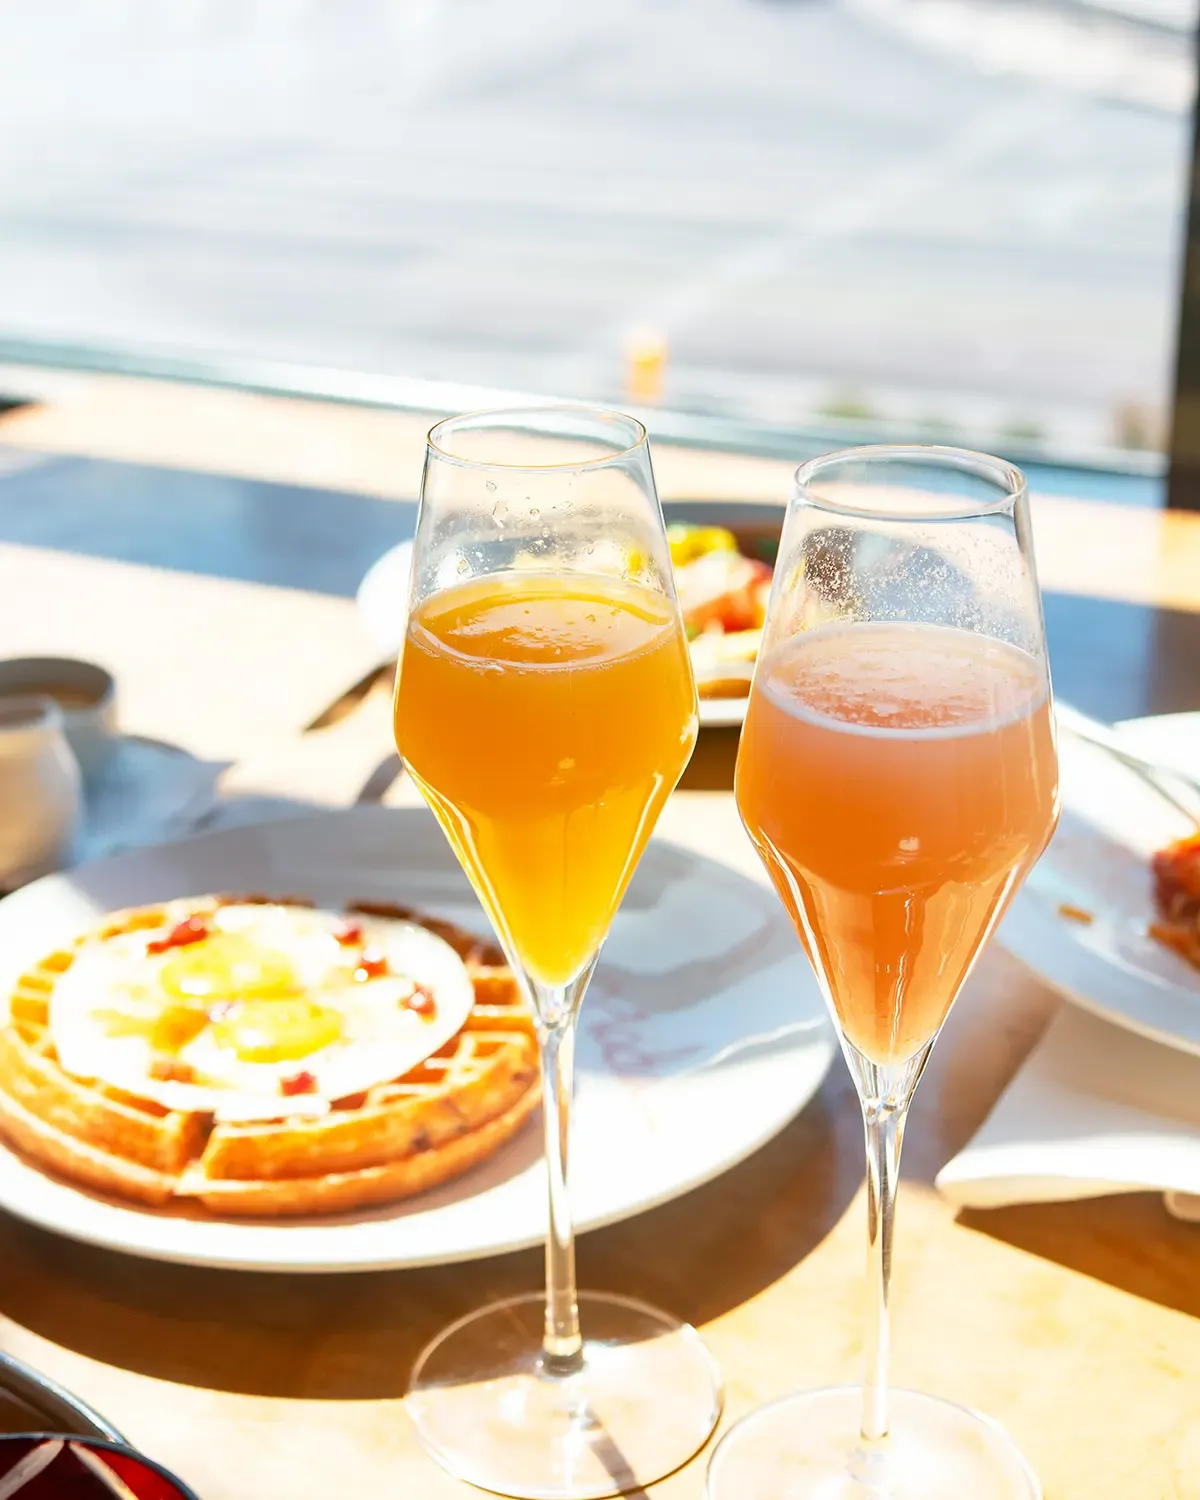 GiadaVegas - Is there a better way to ring in the weekend than with #GiadaVegas Friday brunch